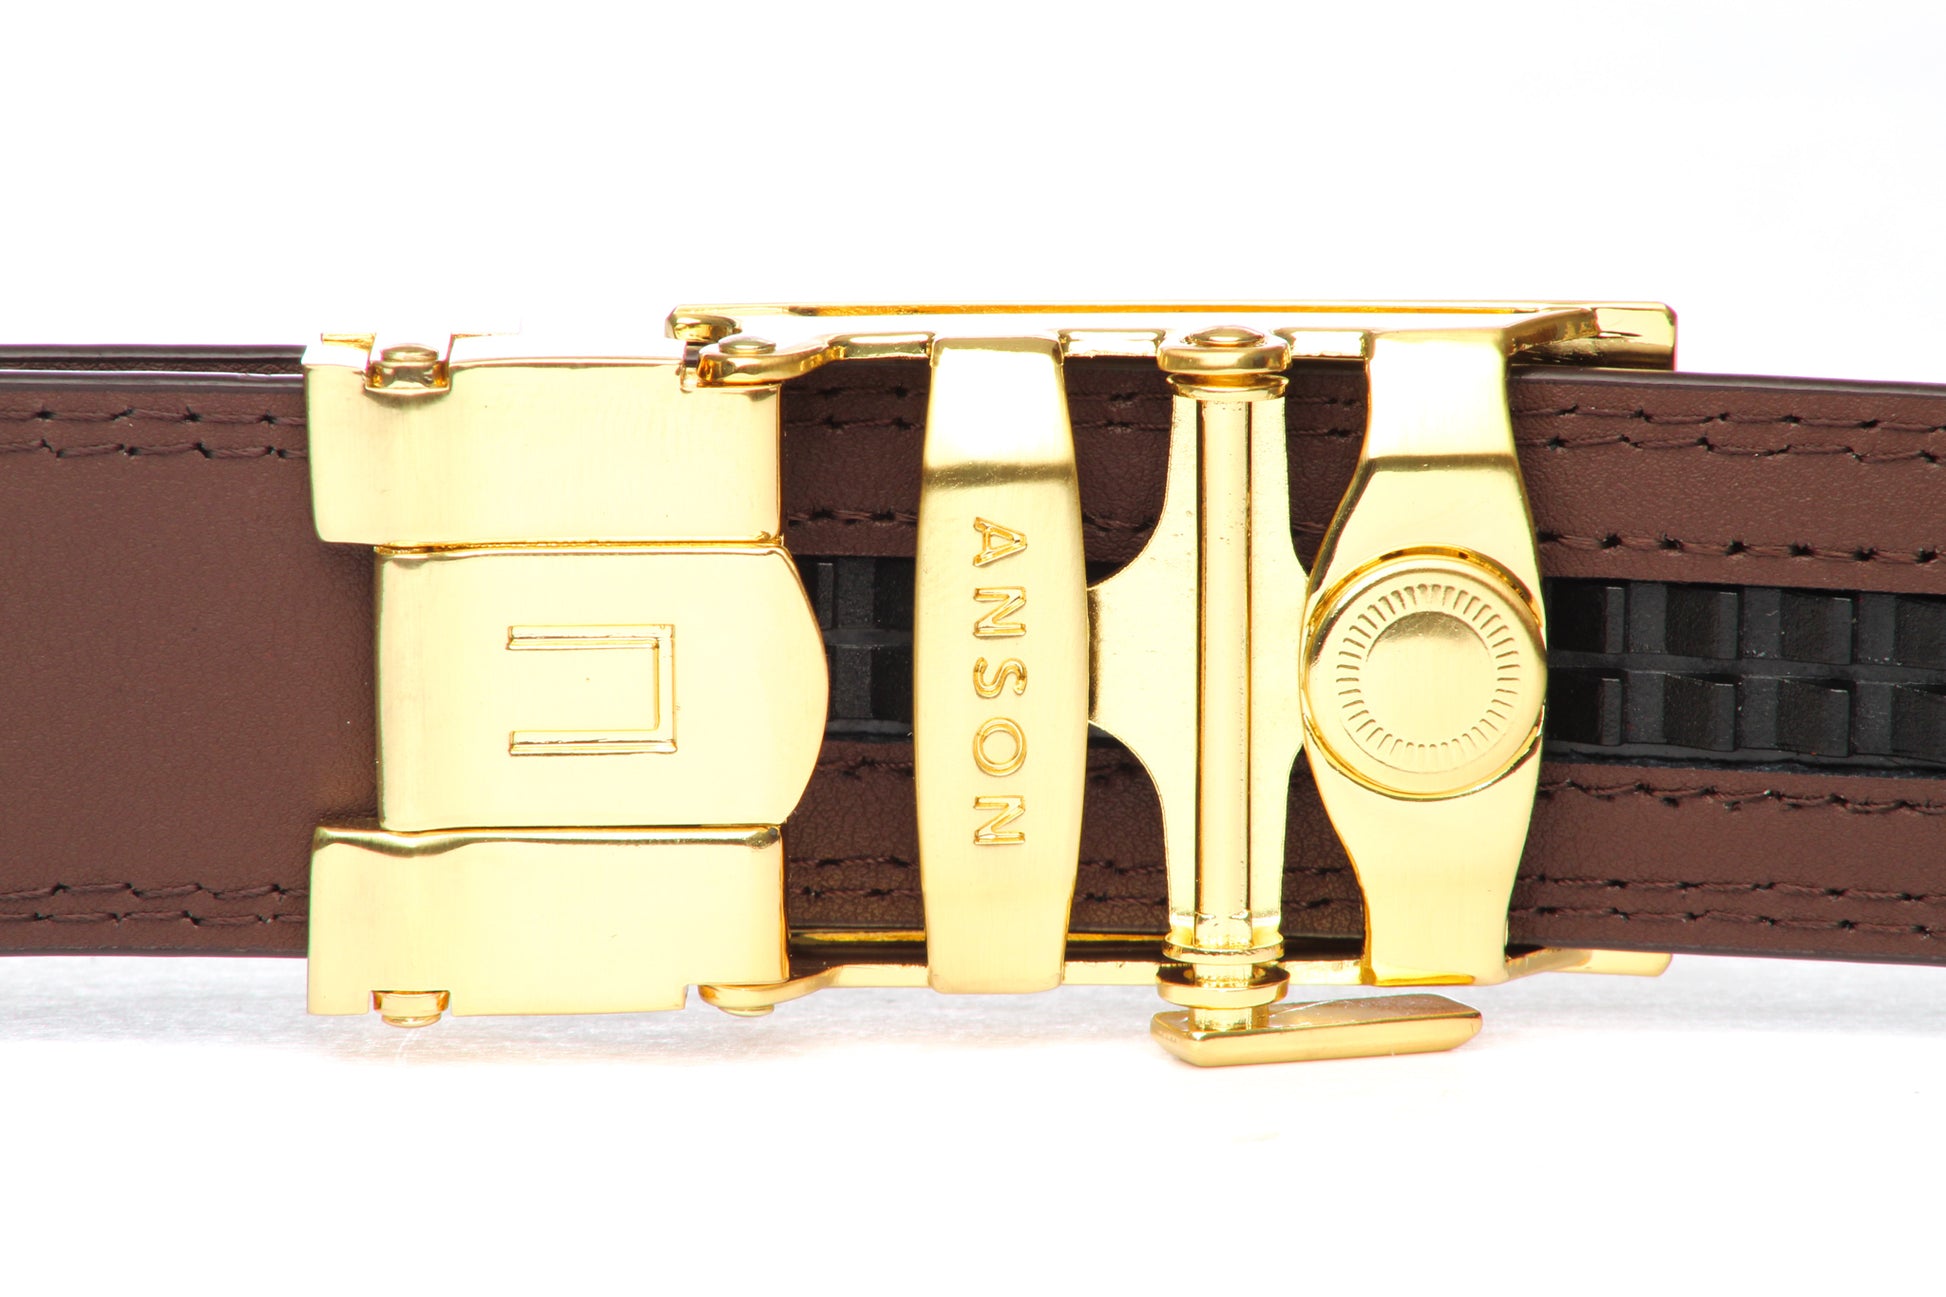 Men's traditional ratchet belt buckle in gold with a 1.25-inch width, back view.